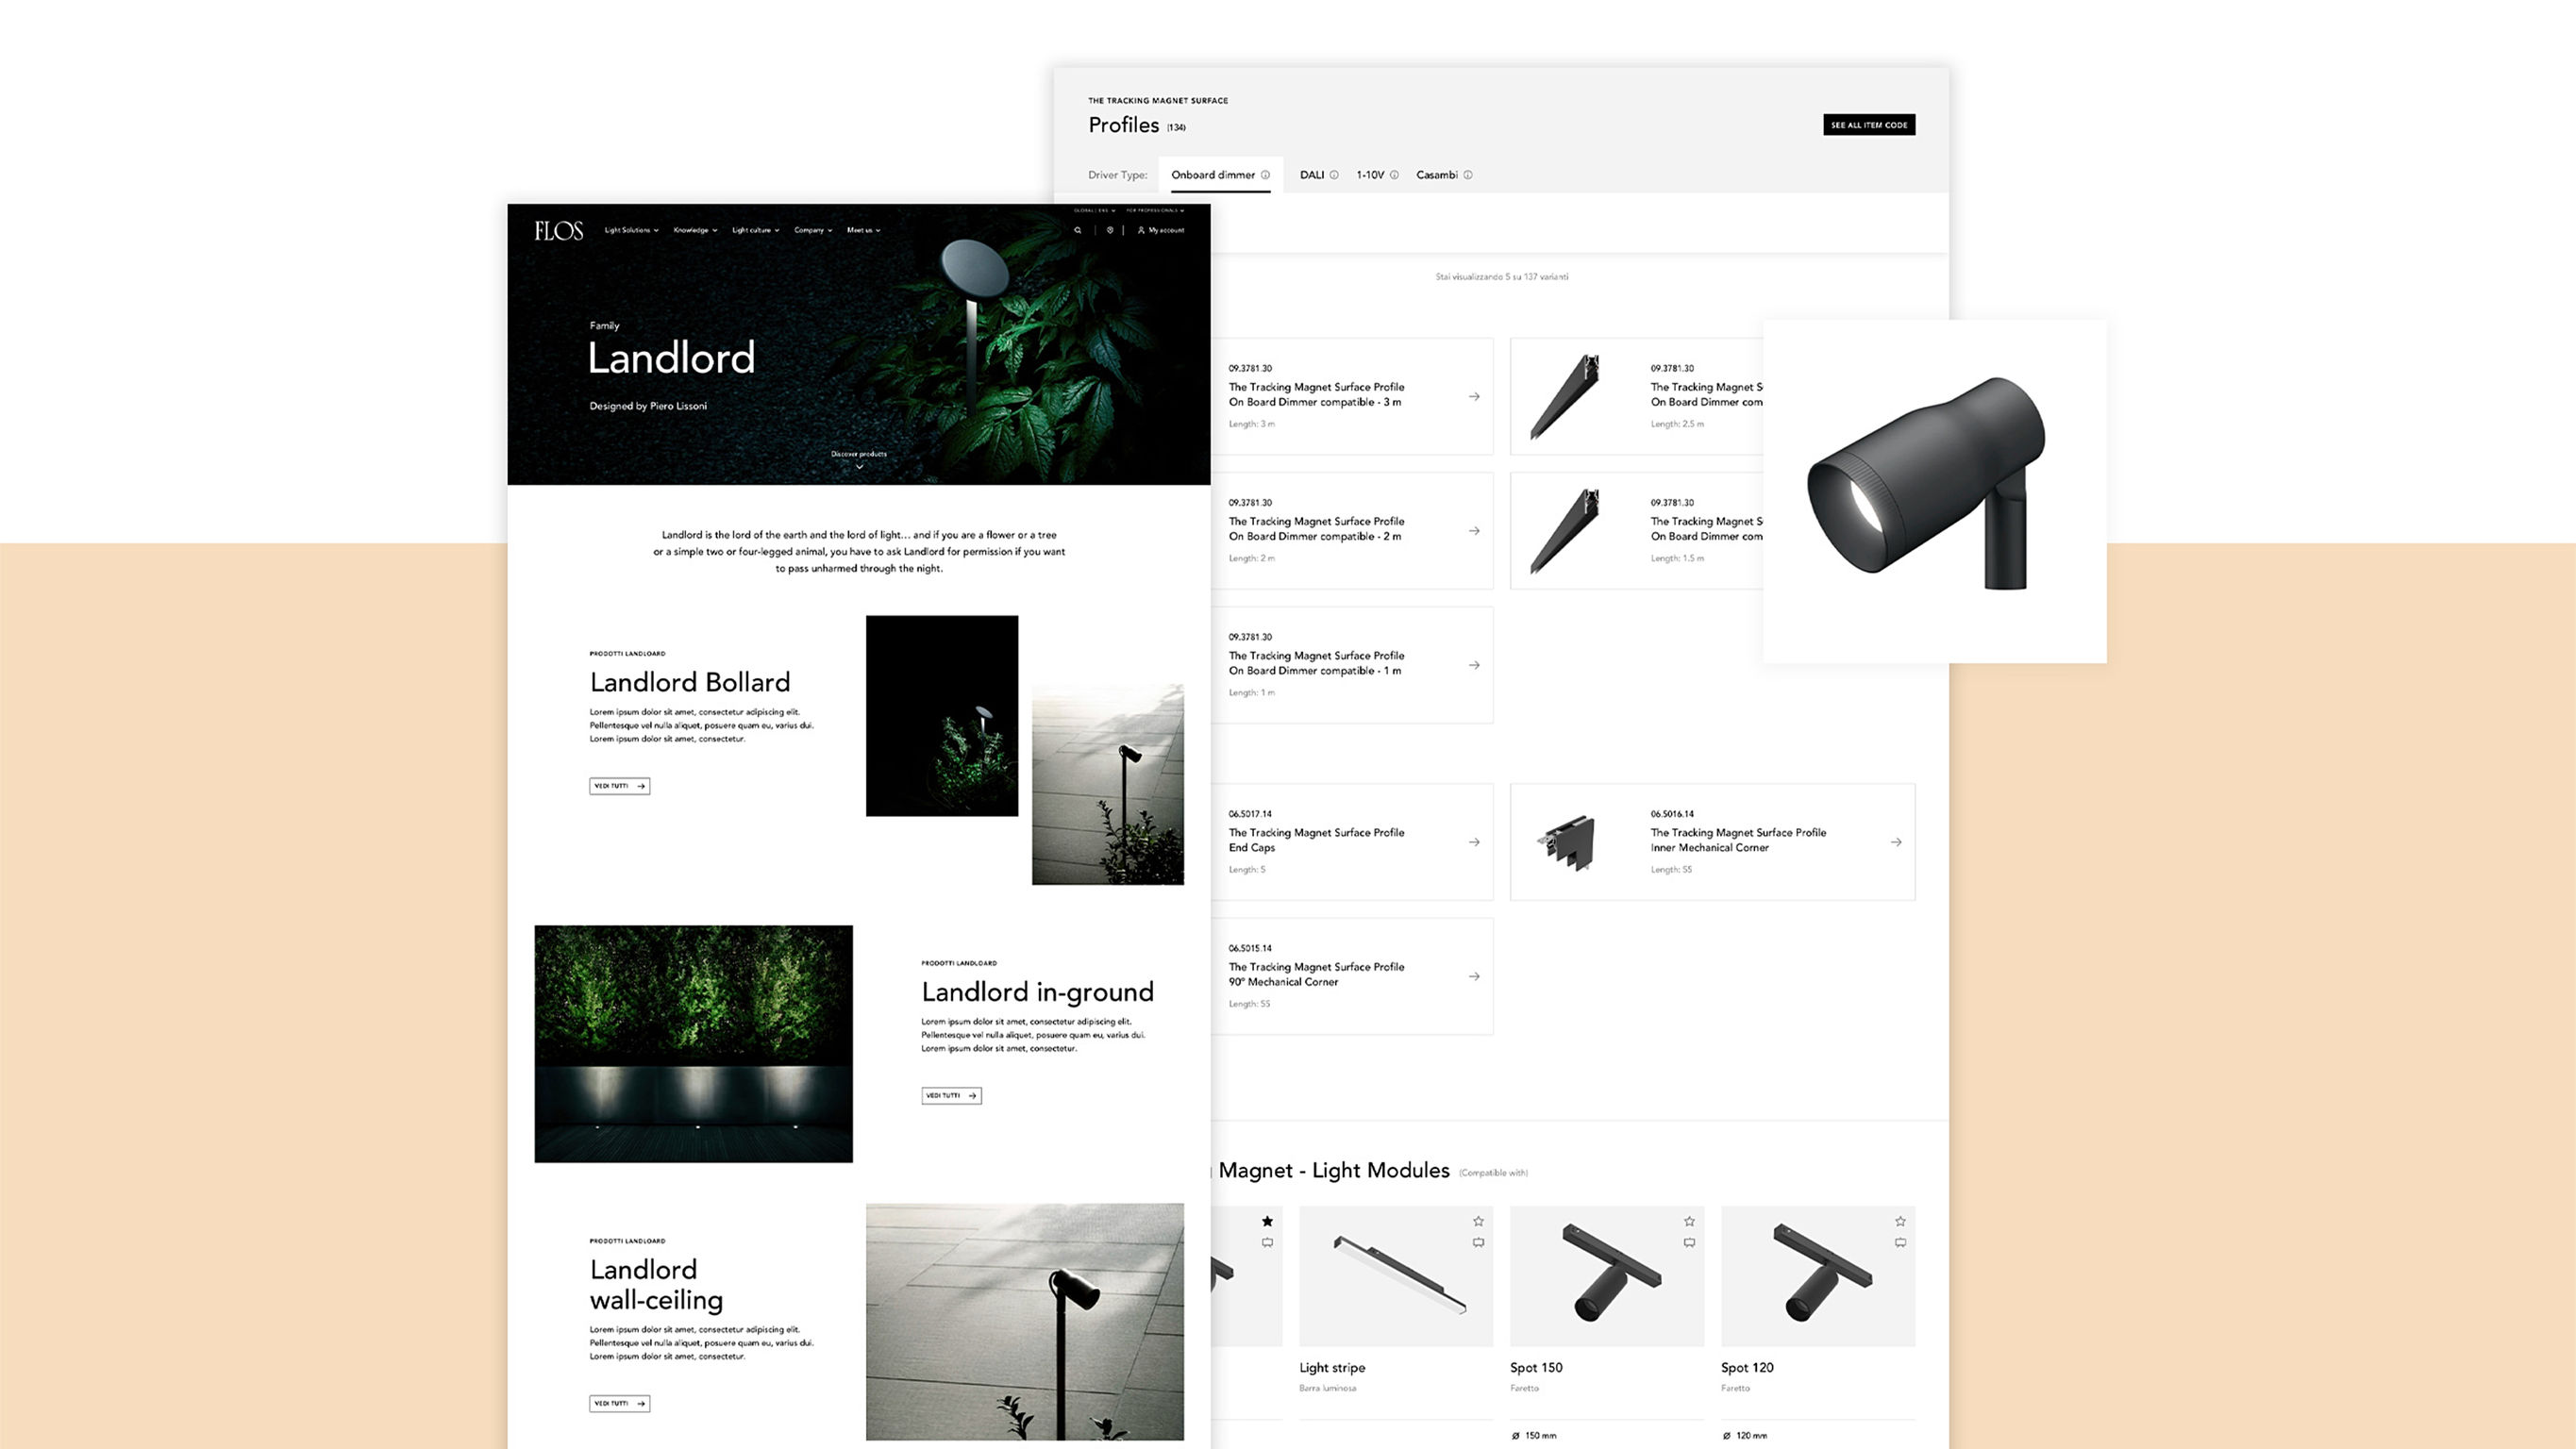 Flos: end-to-end experience for lighting professional